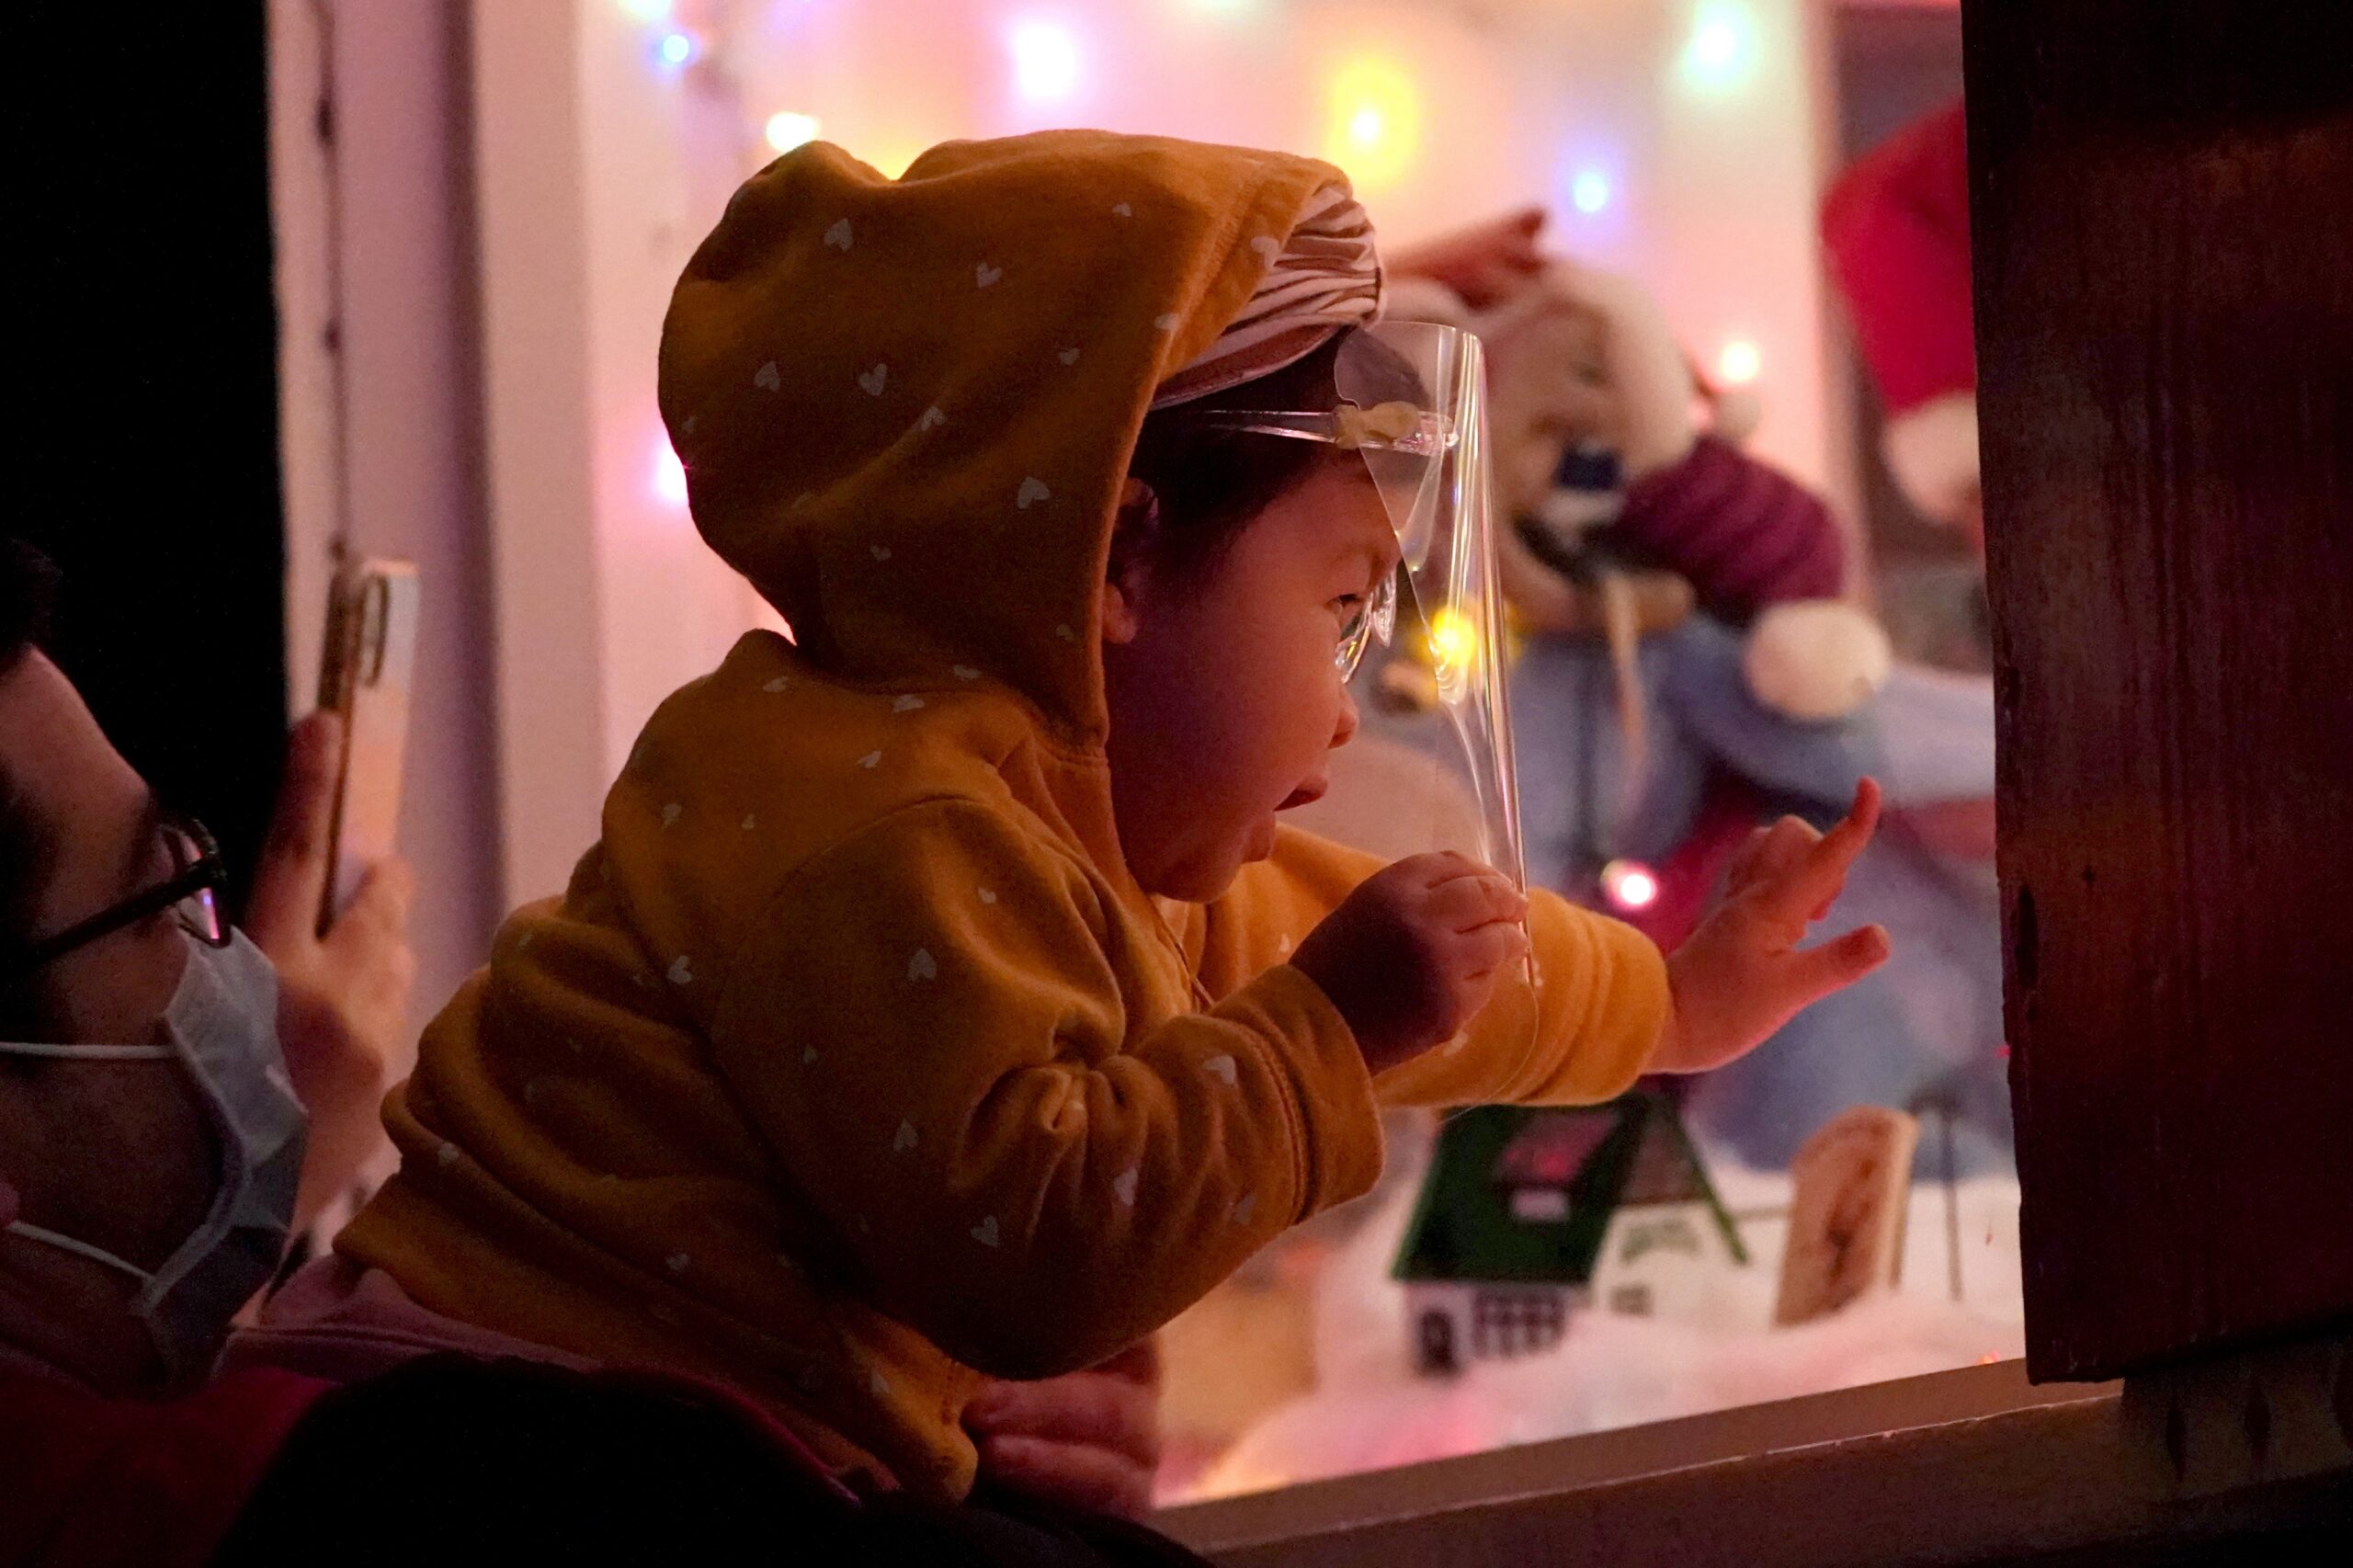 Meya McPalmer, 1, wears a face shield to protect against COVID-19 while peeking into the Christmas display